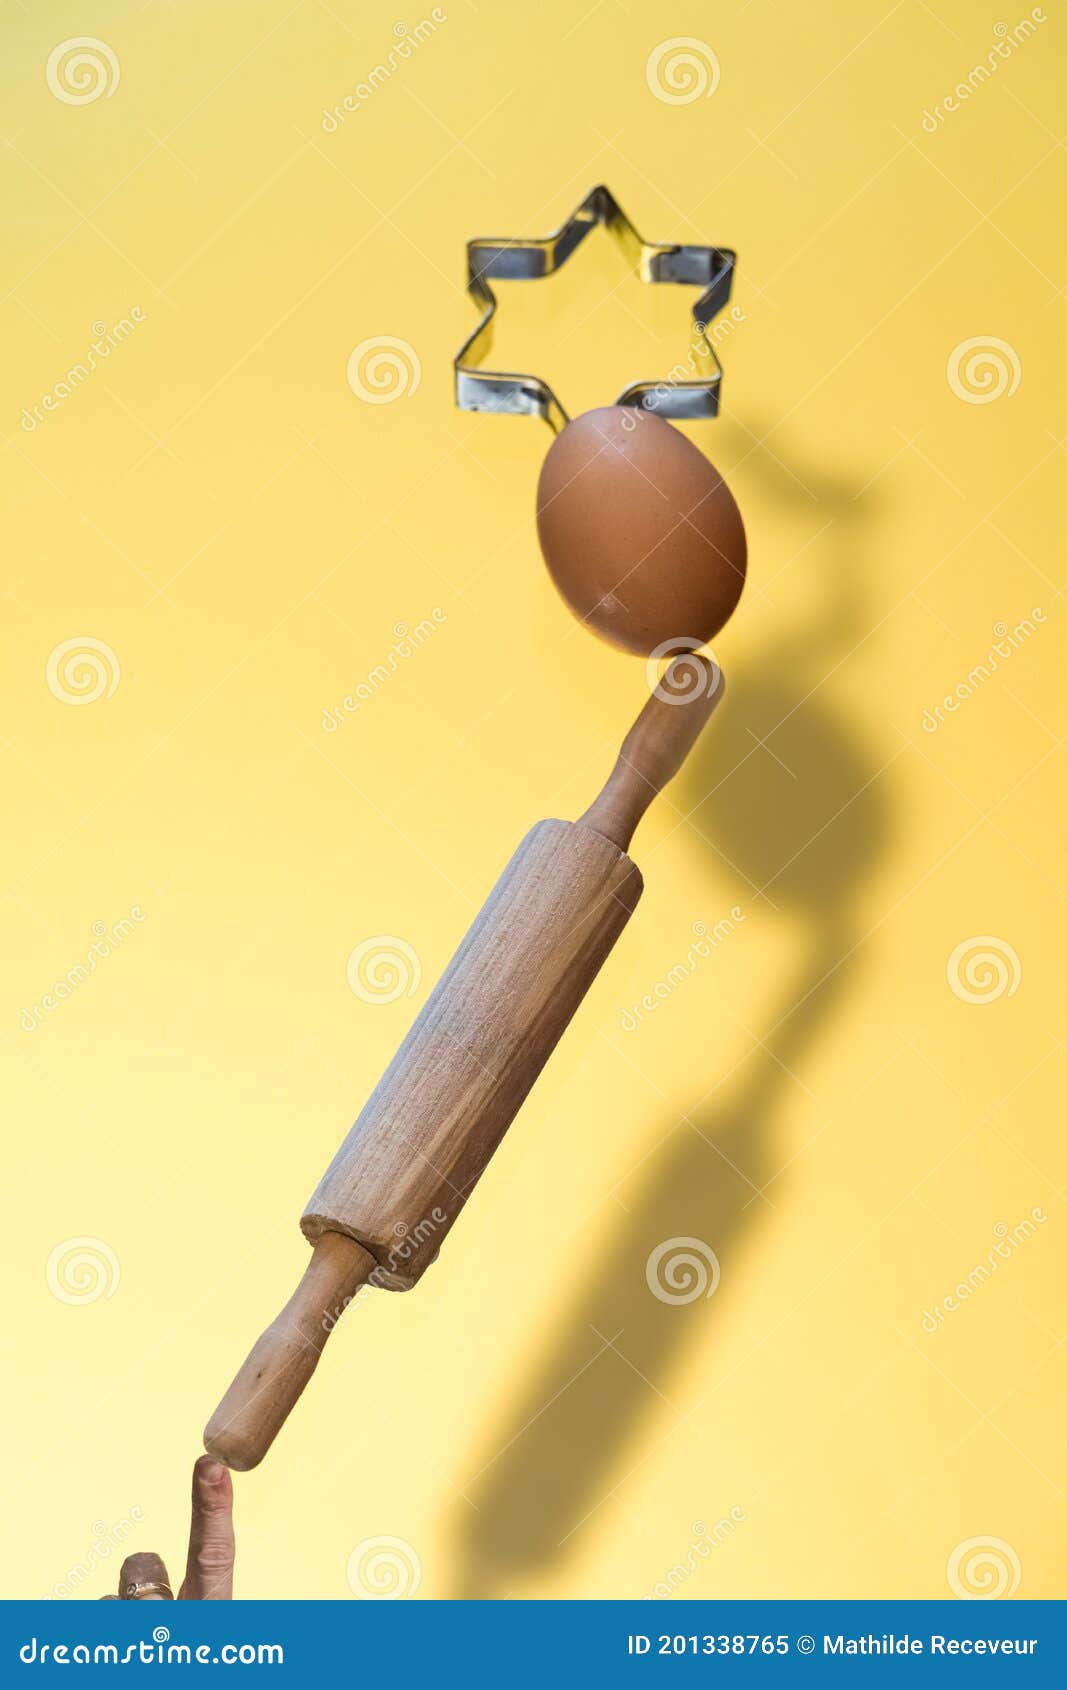 https://thumbs.dreamstime.com/z/bakery-levitation-rolling-pin-egg-star-shaped-cake-pan-each-ingredient-top-other-finger-supporting-objects-201338765.jpg